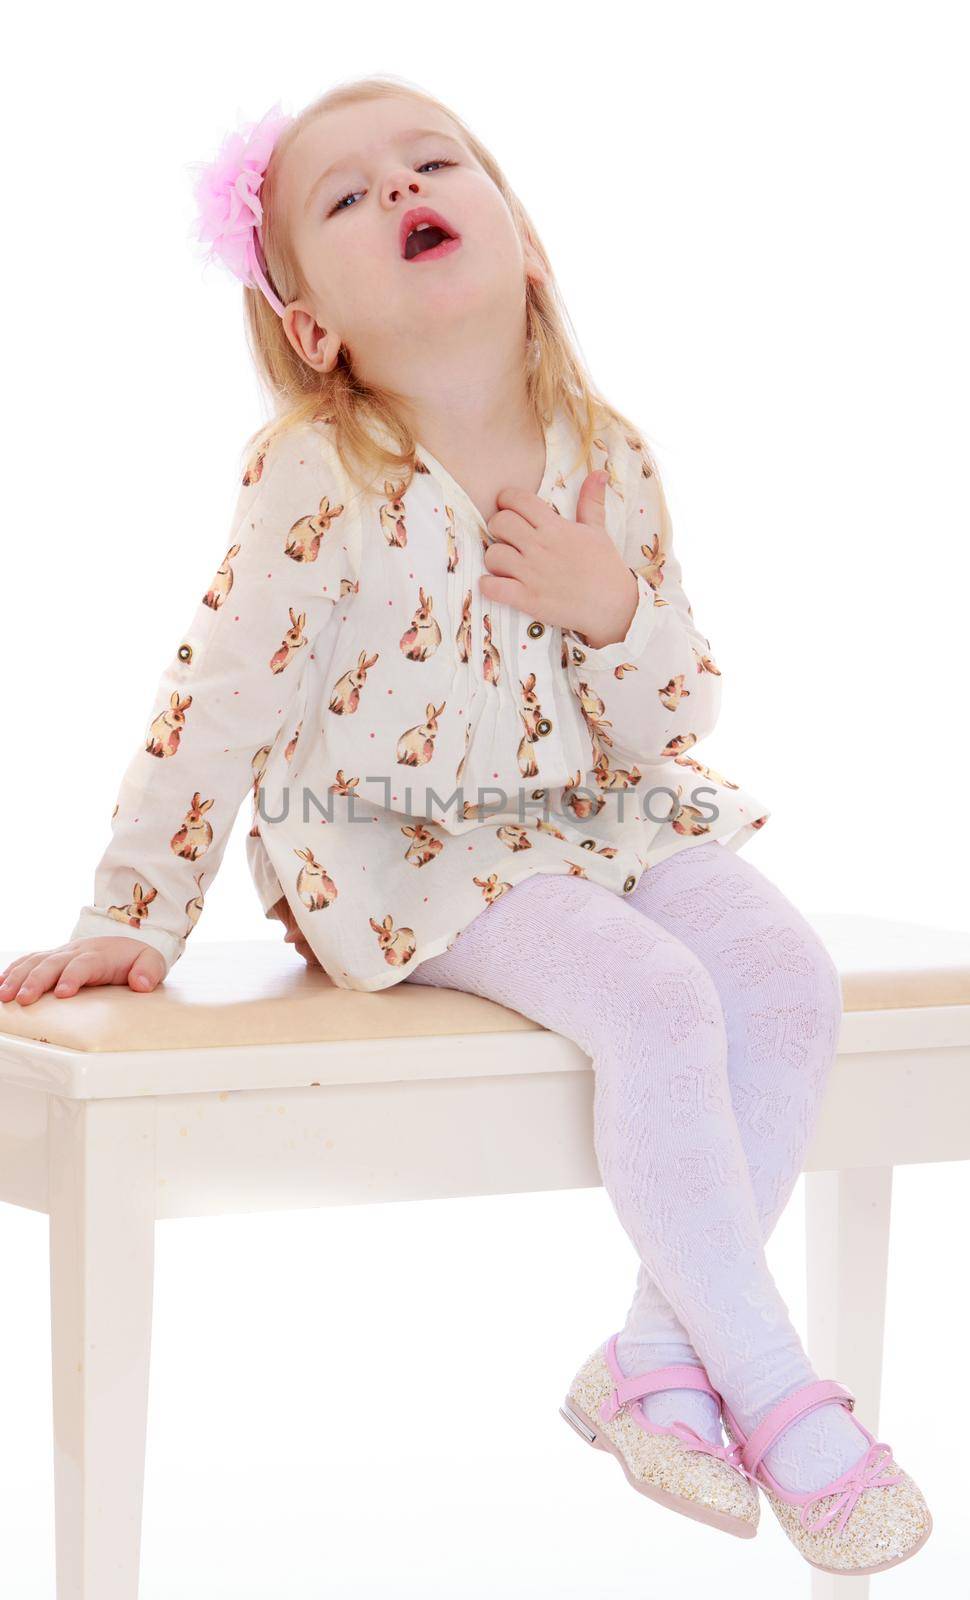 Cute little girl in shorts and white top thing with a big pink bow on her head. Girl sitting on white stools and faint from the heat - Isolated on white background